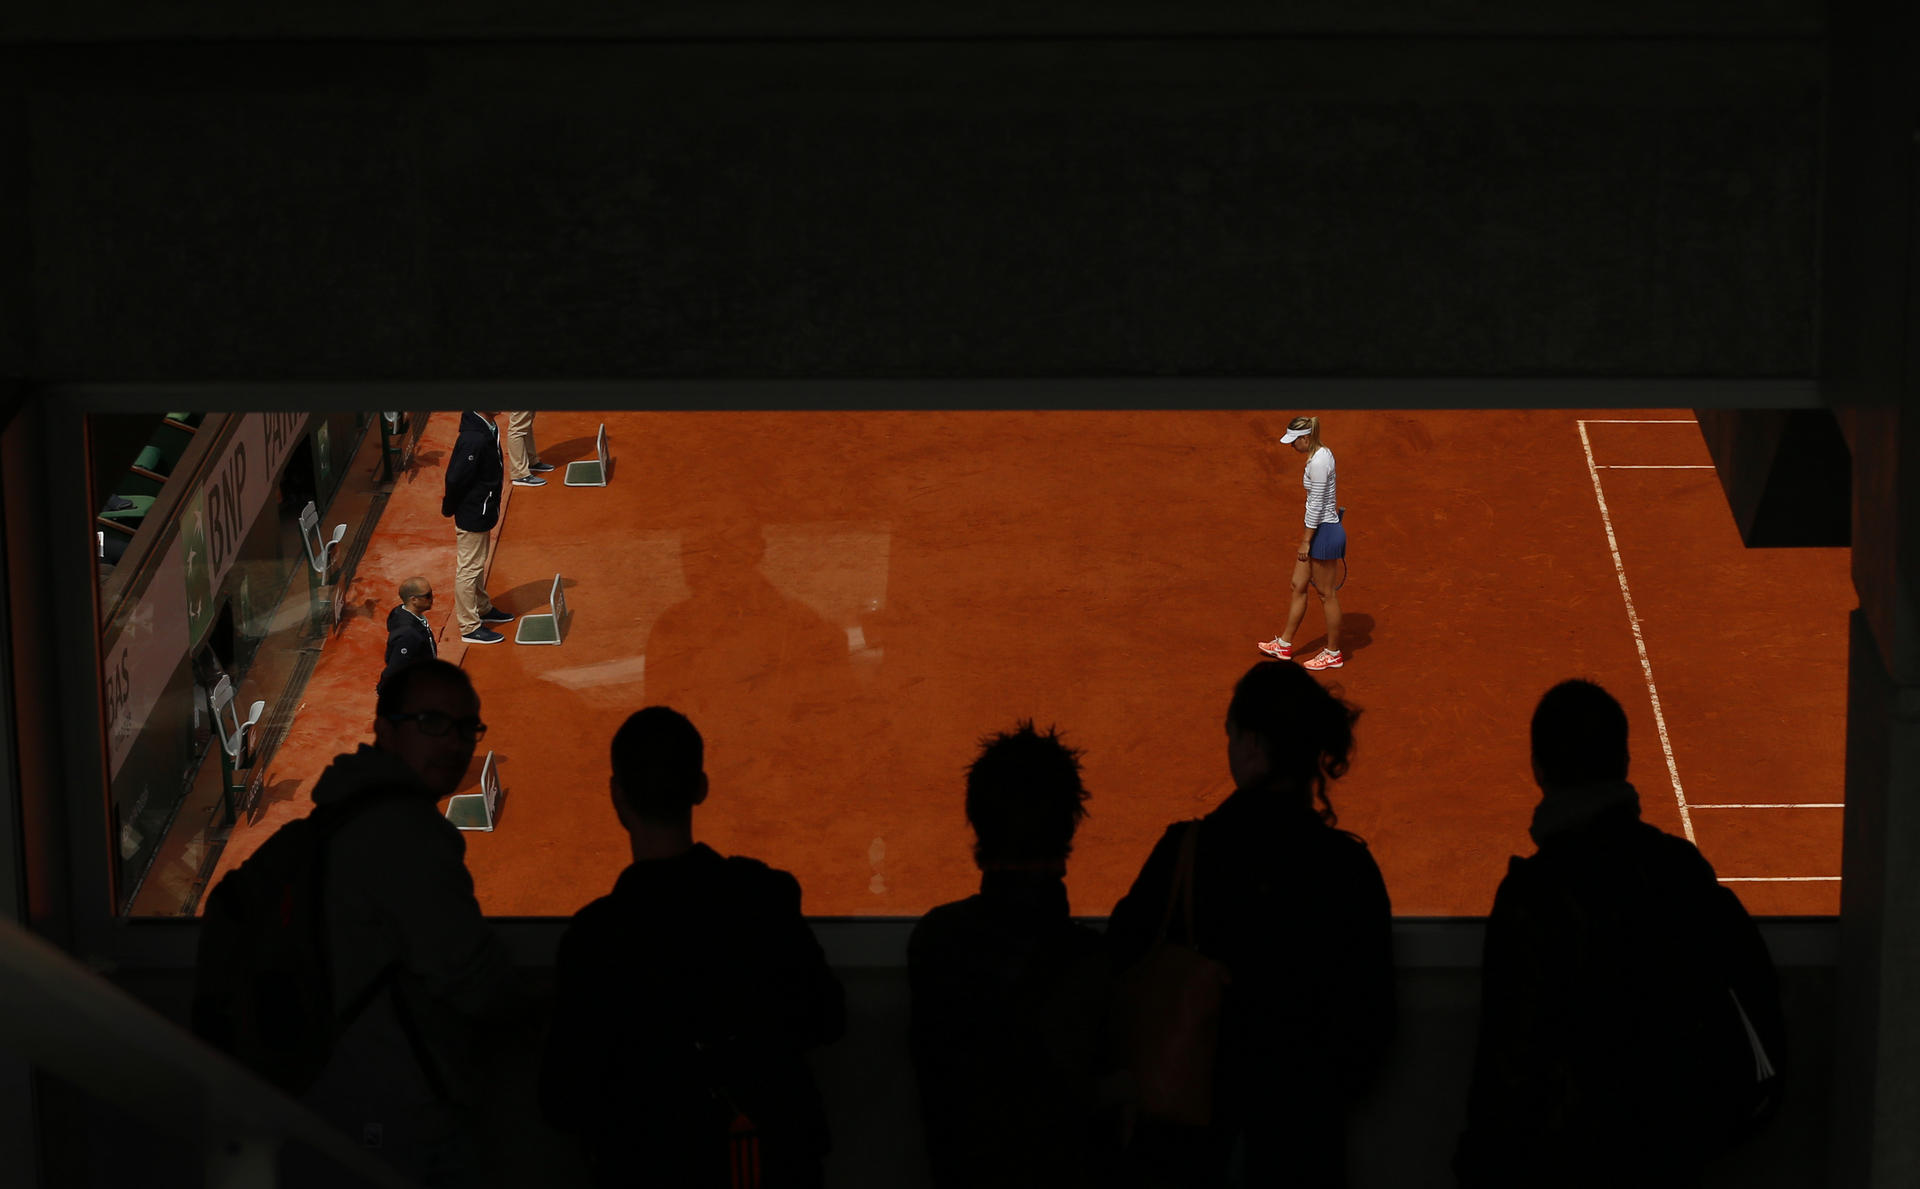 Maria Sharapova cuts a lonely figure in a fourth-round match she lost against Lucie Safarova at the French Open. Photo: Reuters